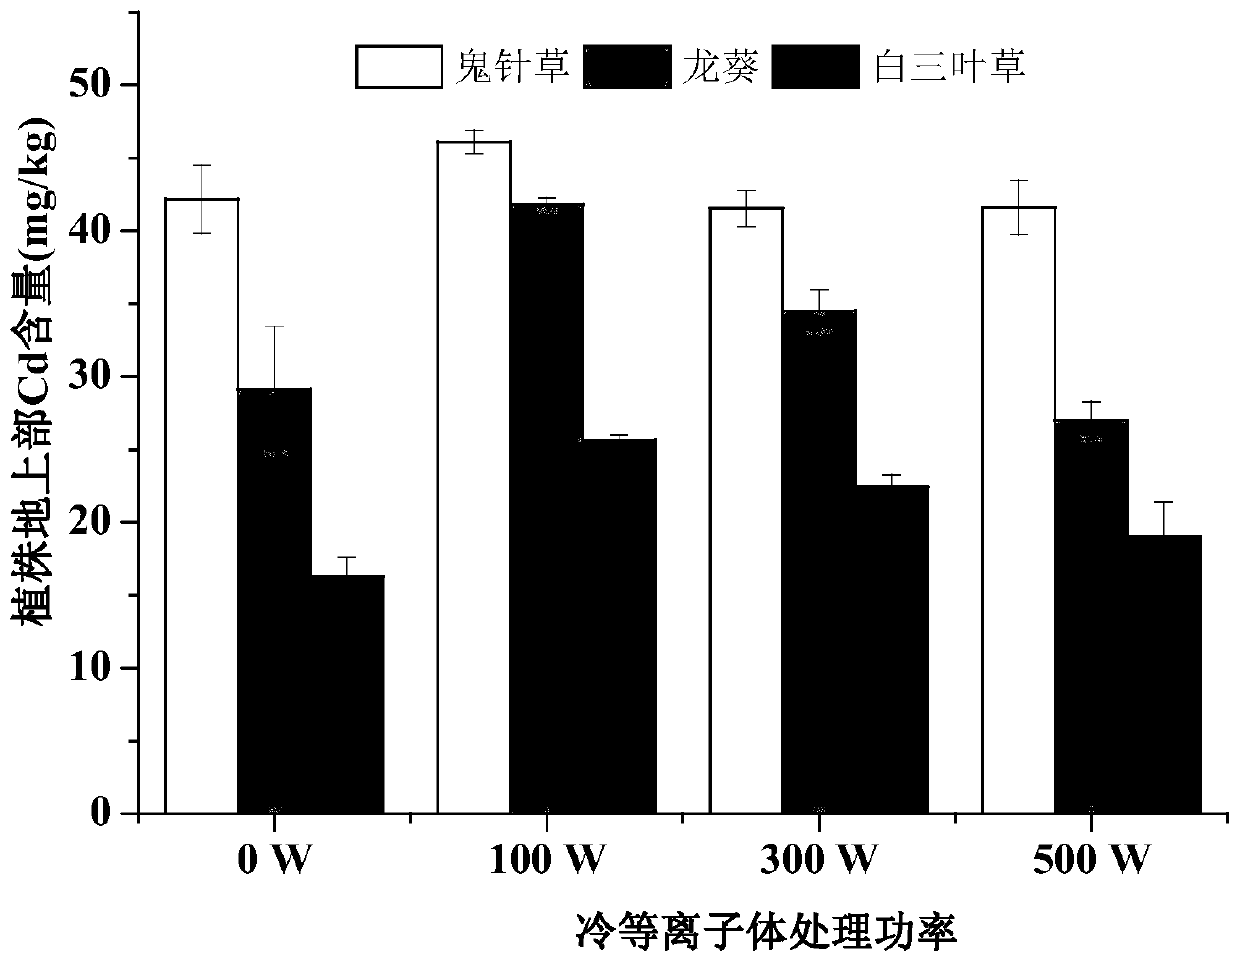 Application of cold plasma seed treatment method in strengthening phytoremediation of cadmium contaminated soil